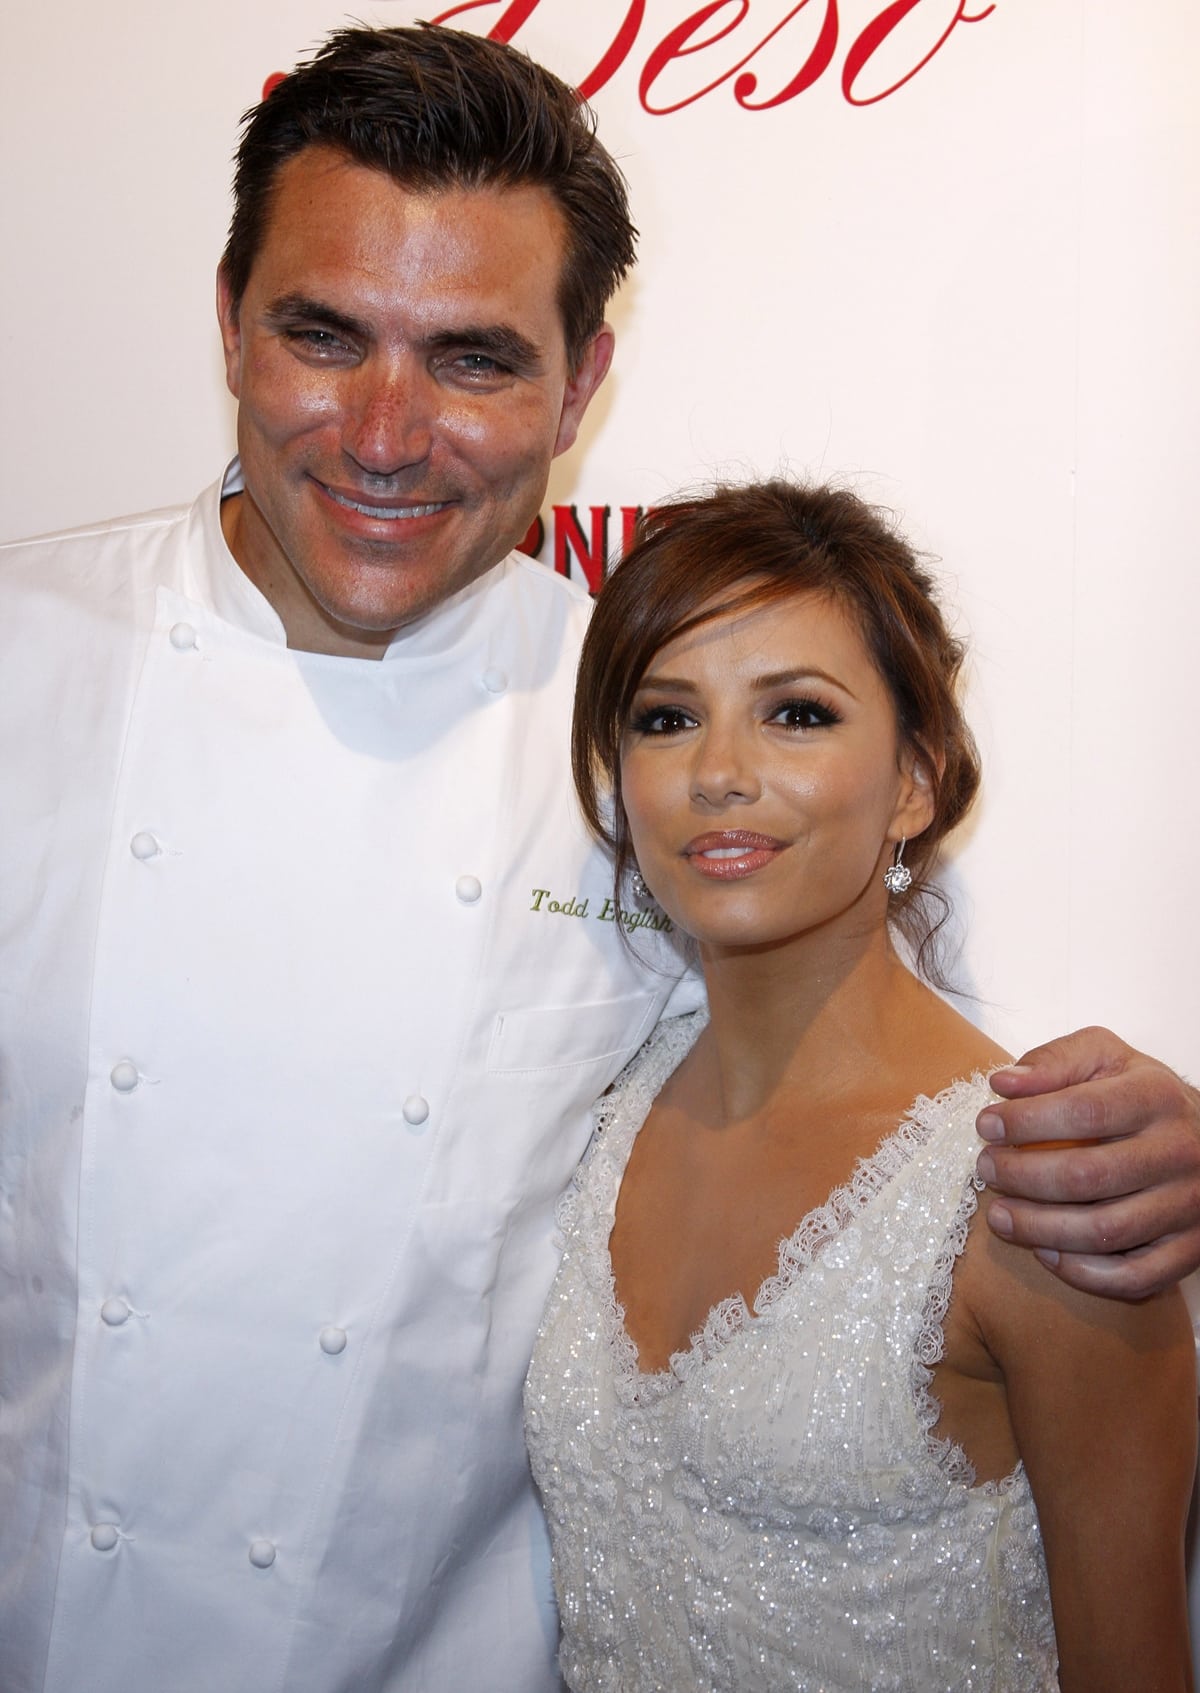 Eva Longoria Parker in a Marchesa dress at the opening of her new restaurant, Beso, with Chef Todd English on Hollywood Boulevard